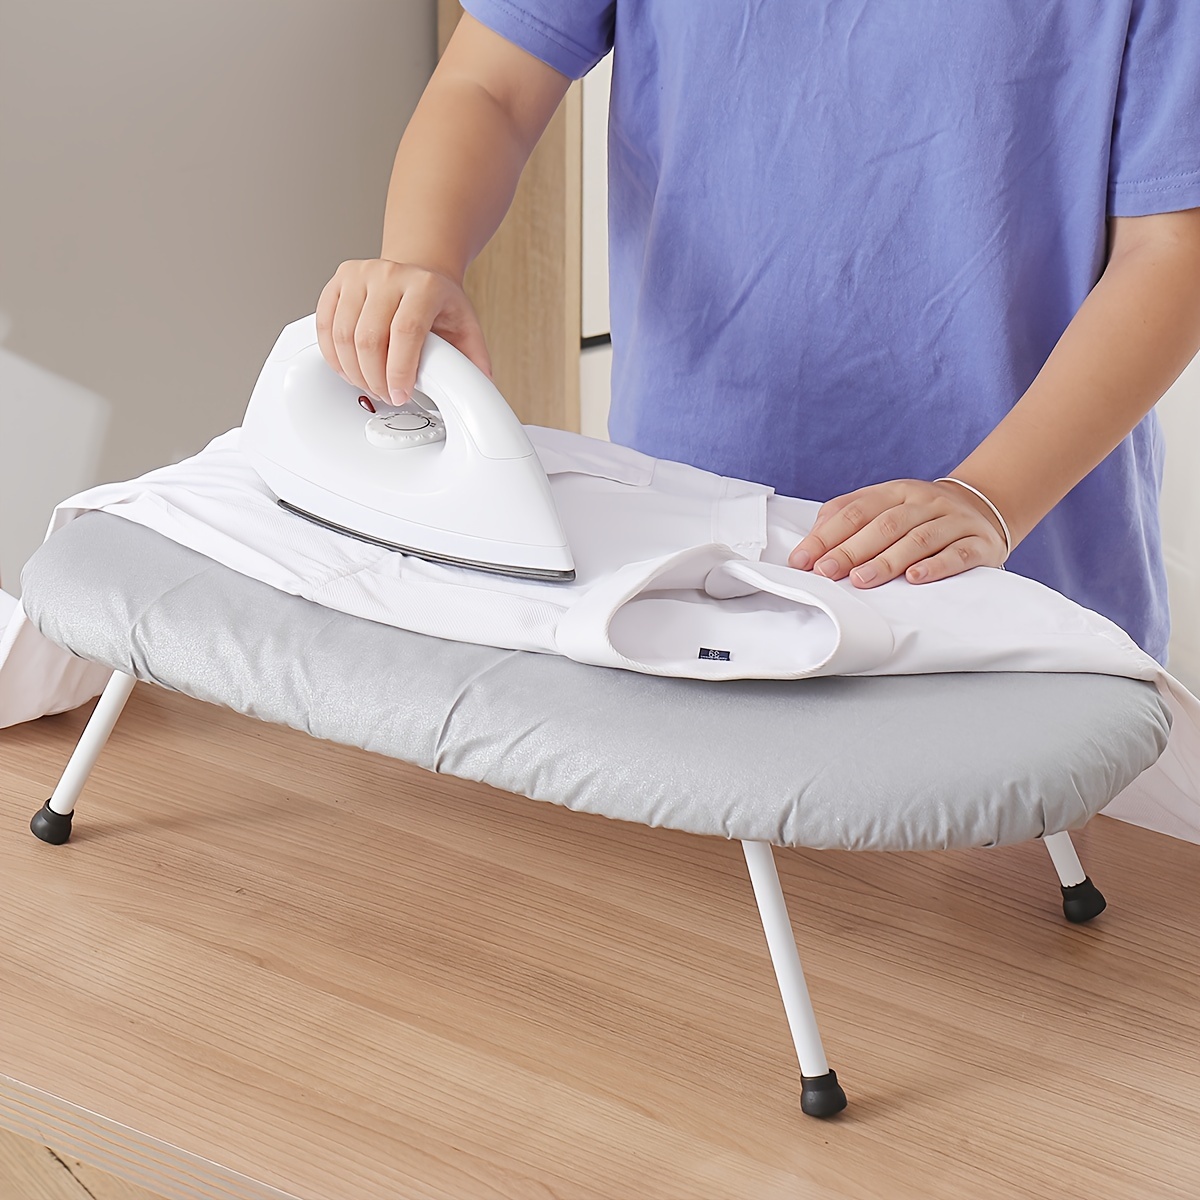 Portable Folding Ironing Pad Heat Resistant Travel Ironing Mat 2 In 1  Electric-ironing Board And Storage Bag Countertop Iron Pad - Ironing Boards  - AliExpress